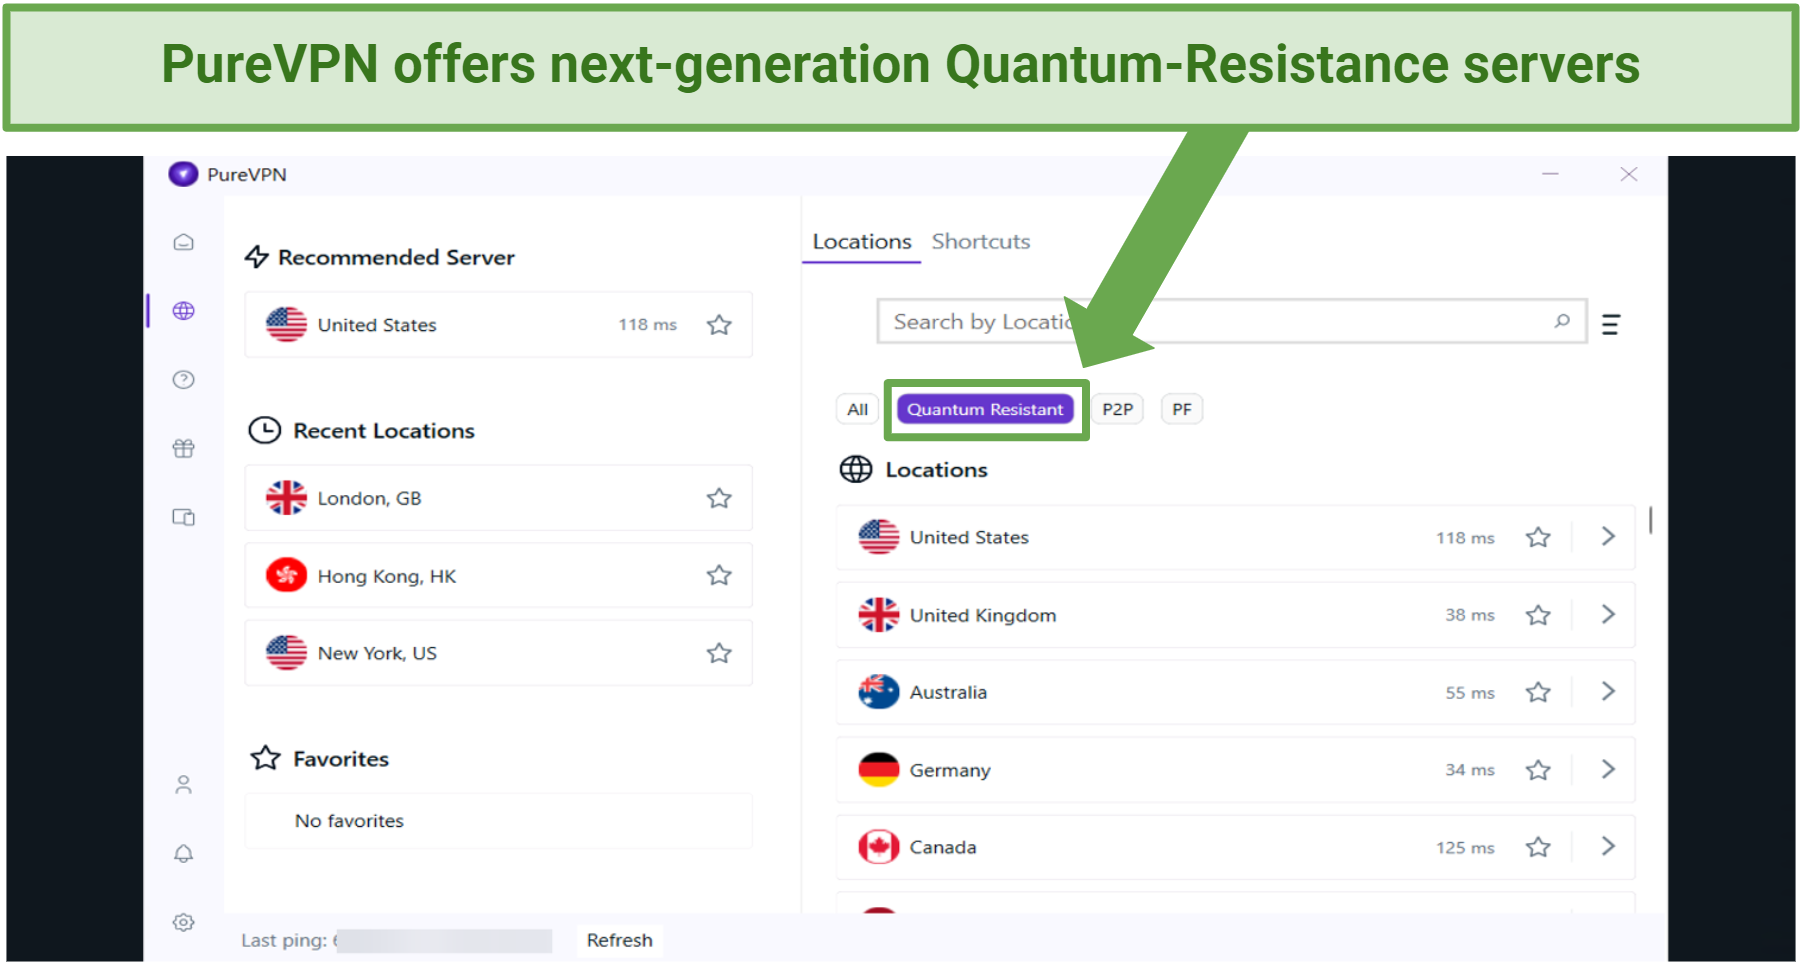 Screenshot of PureVPN's server interface with highlighted Quantum Resistant servers